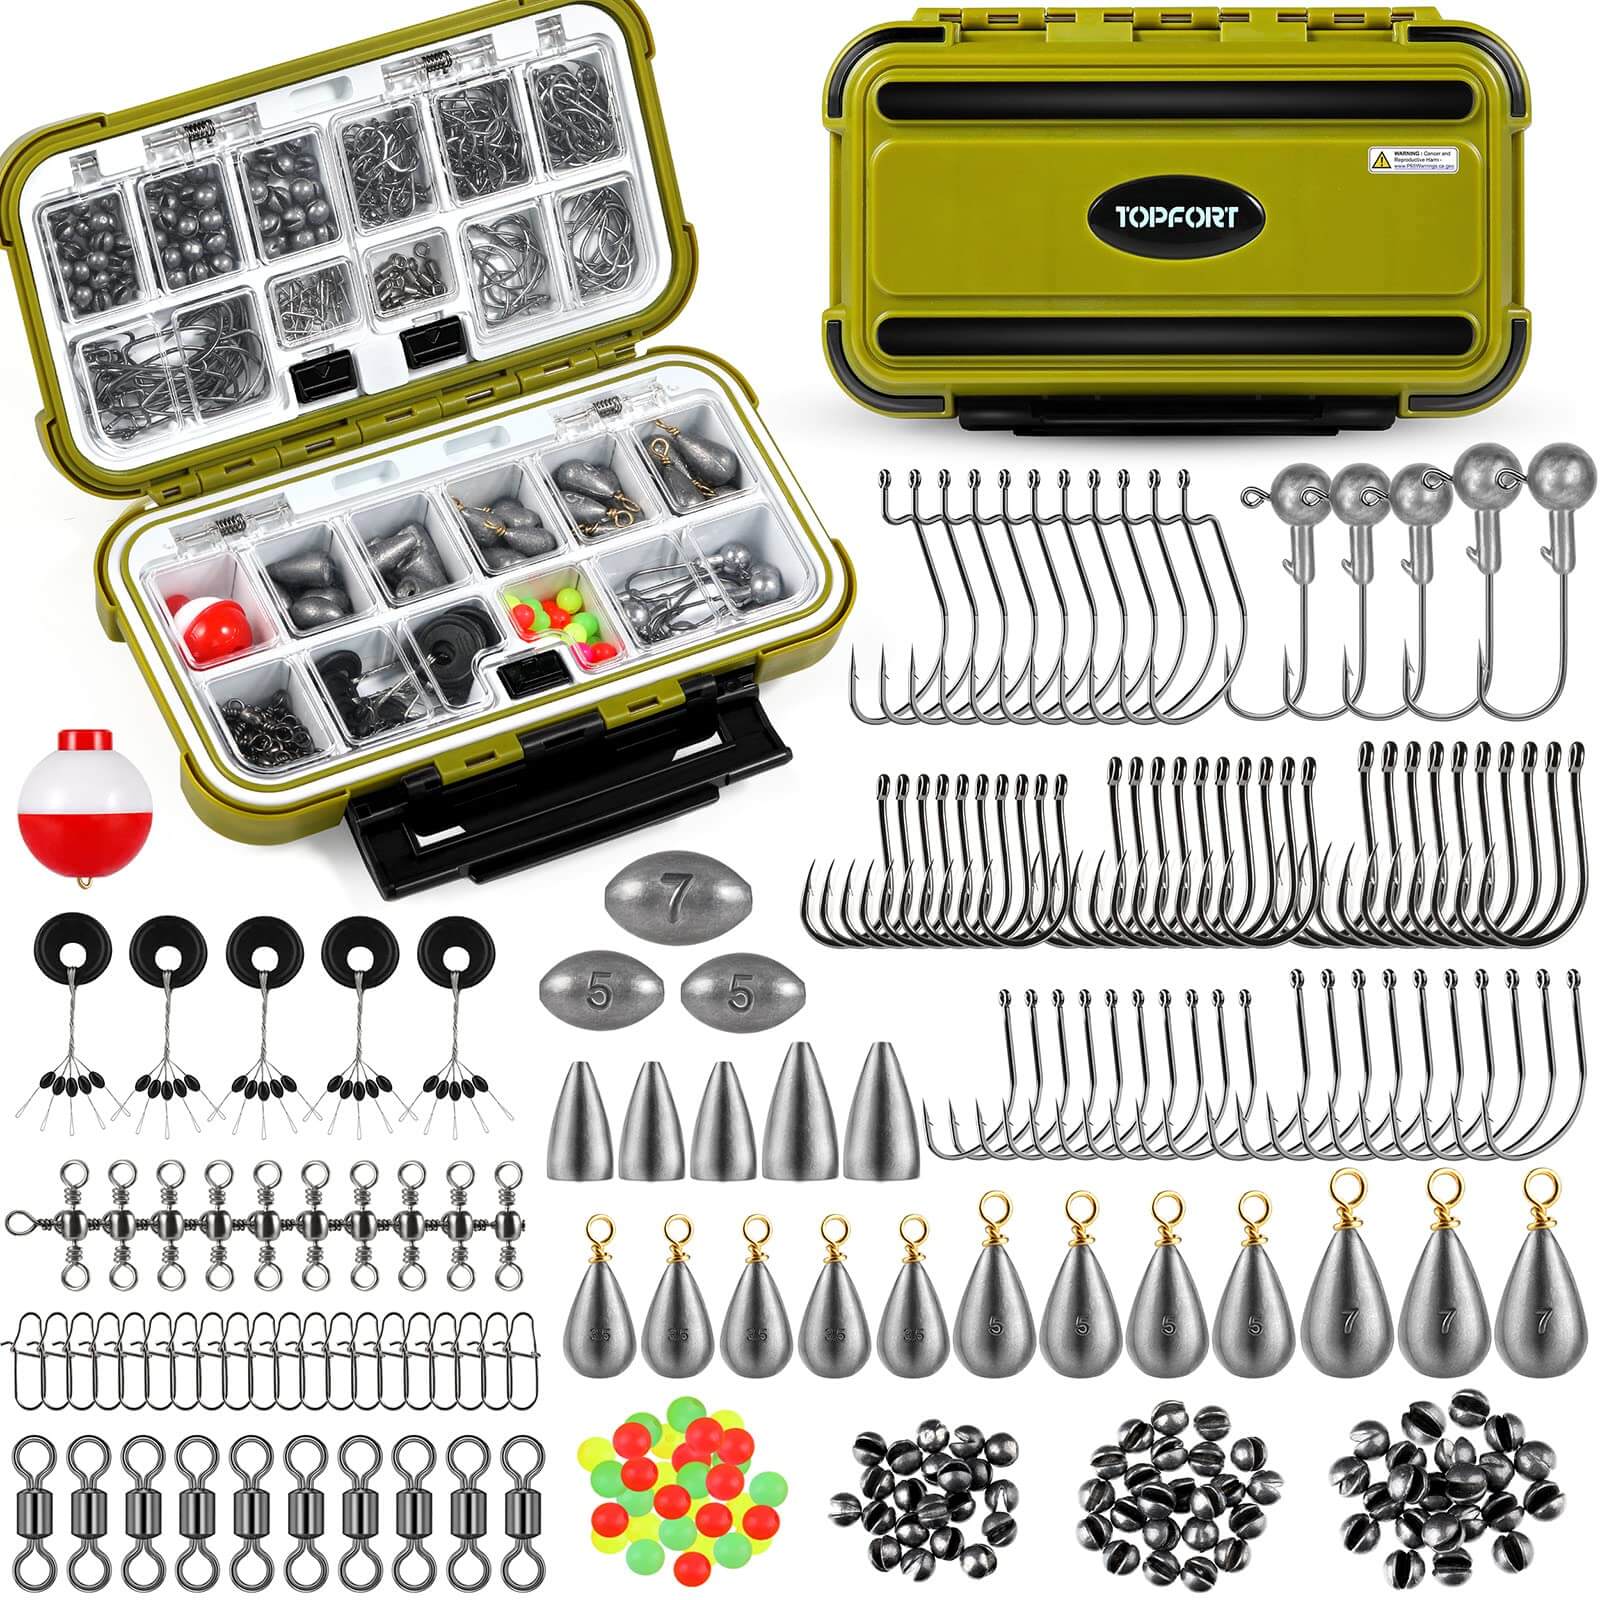 PLUSINNO 292pcs Fishing Accessories Kit, Tackle Box with Tackle Included,  Fishing Hooks, Fishing Weights, Spinner Blade, Fishing Gear for Bass,  Bluegill, Crappie, Lure Kits -  Canada